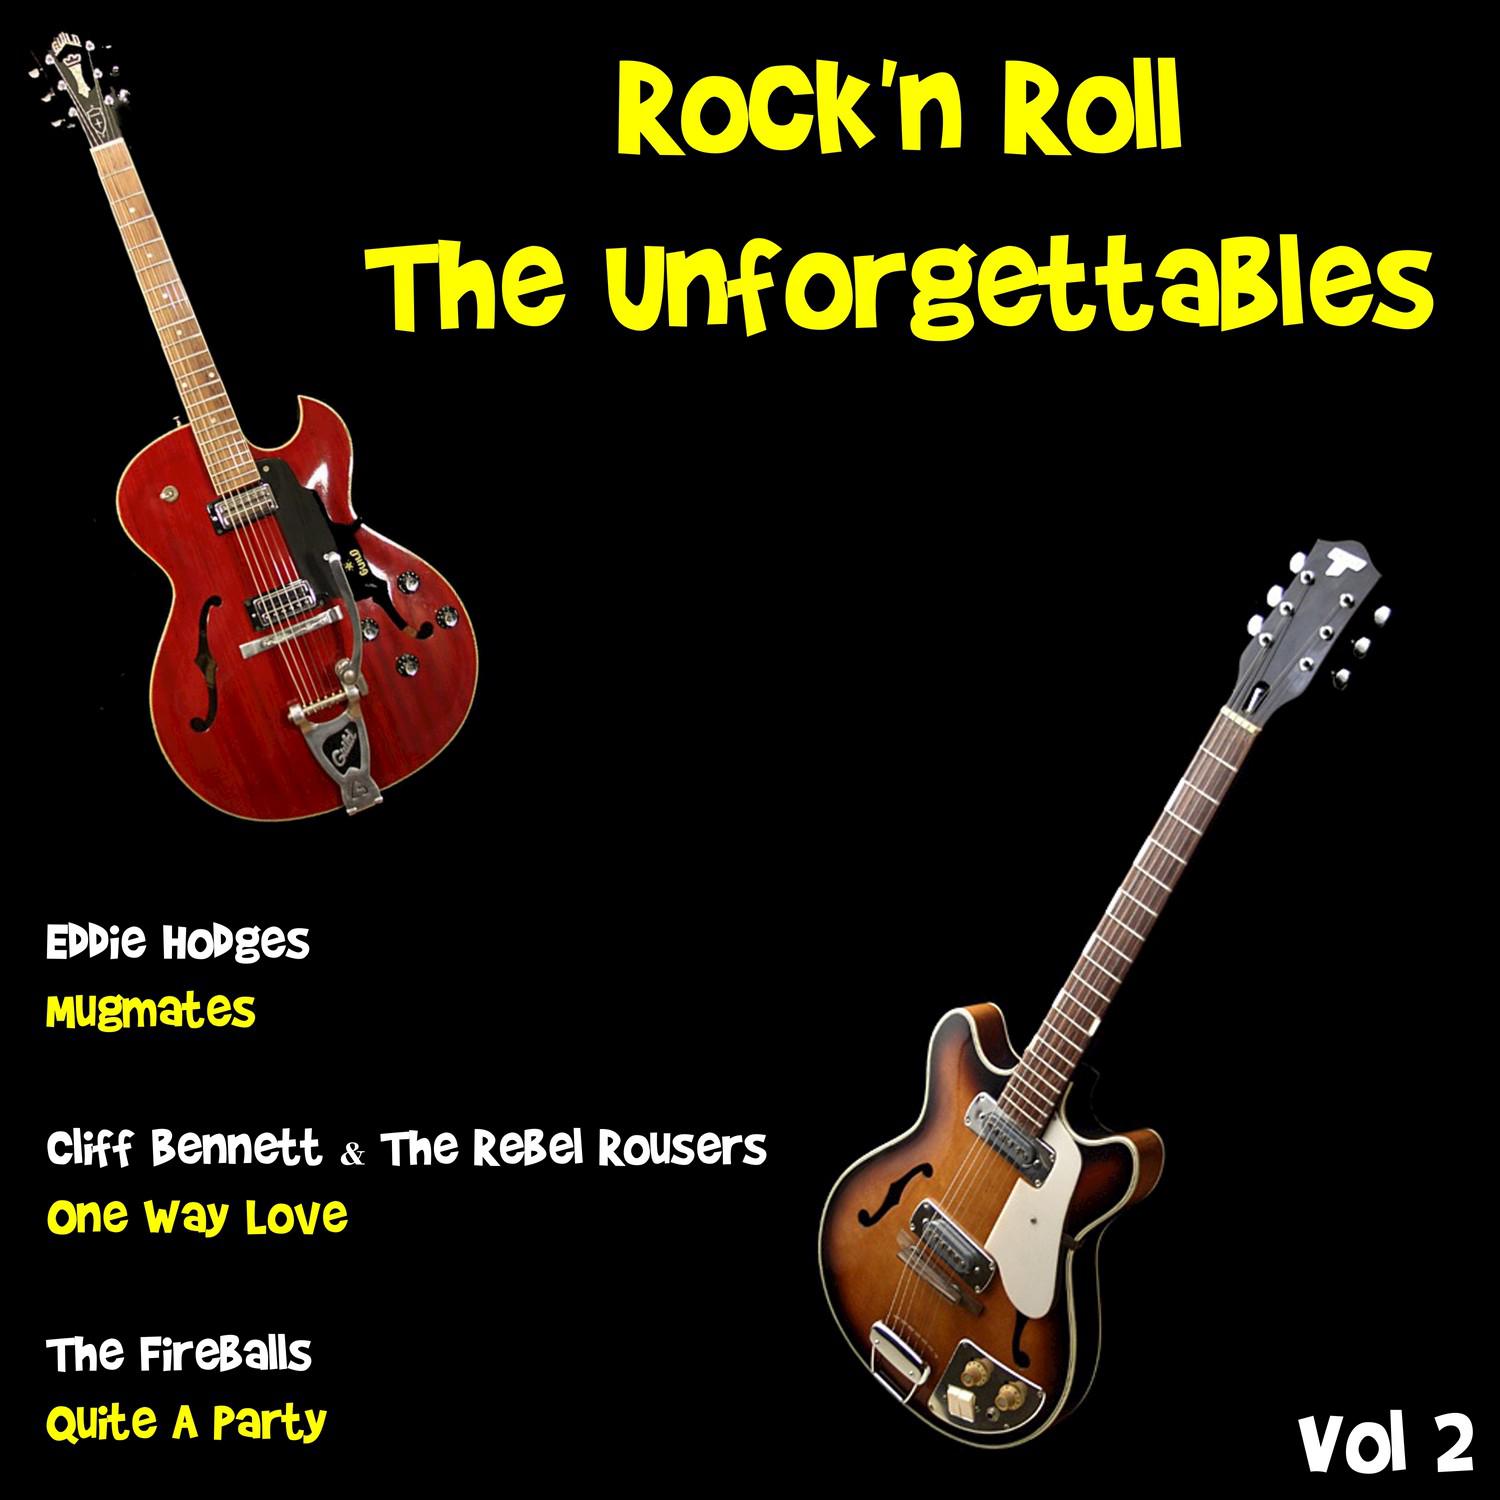 Rock'n Roll the Unforgettables, Vol. 2